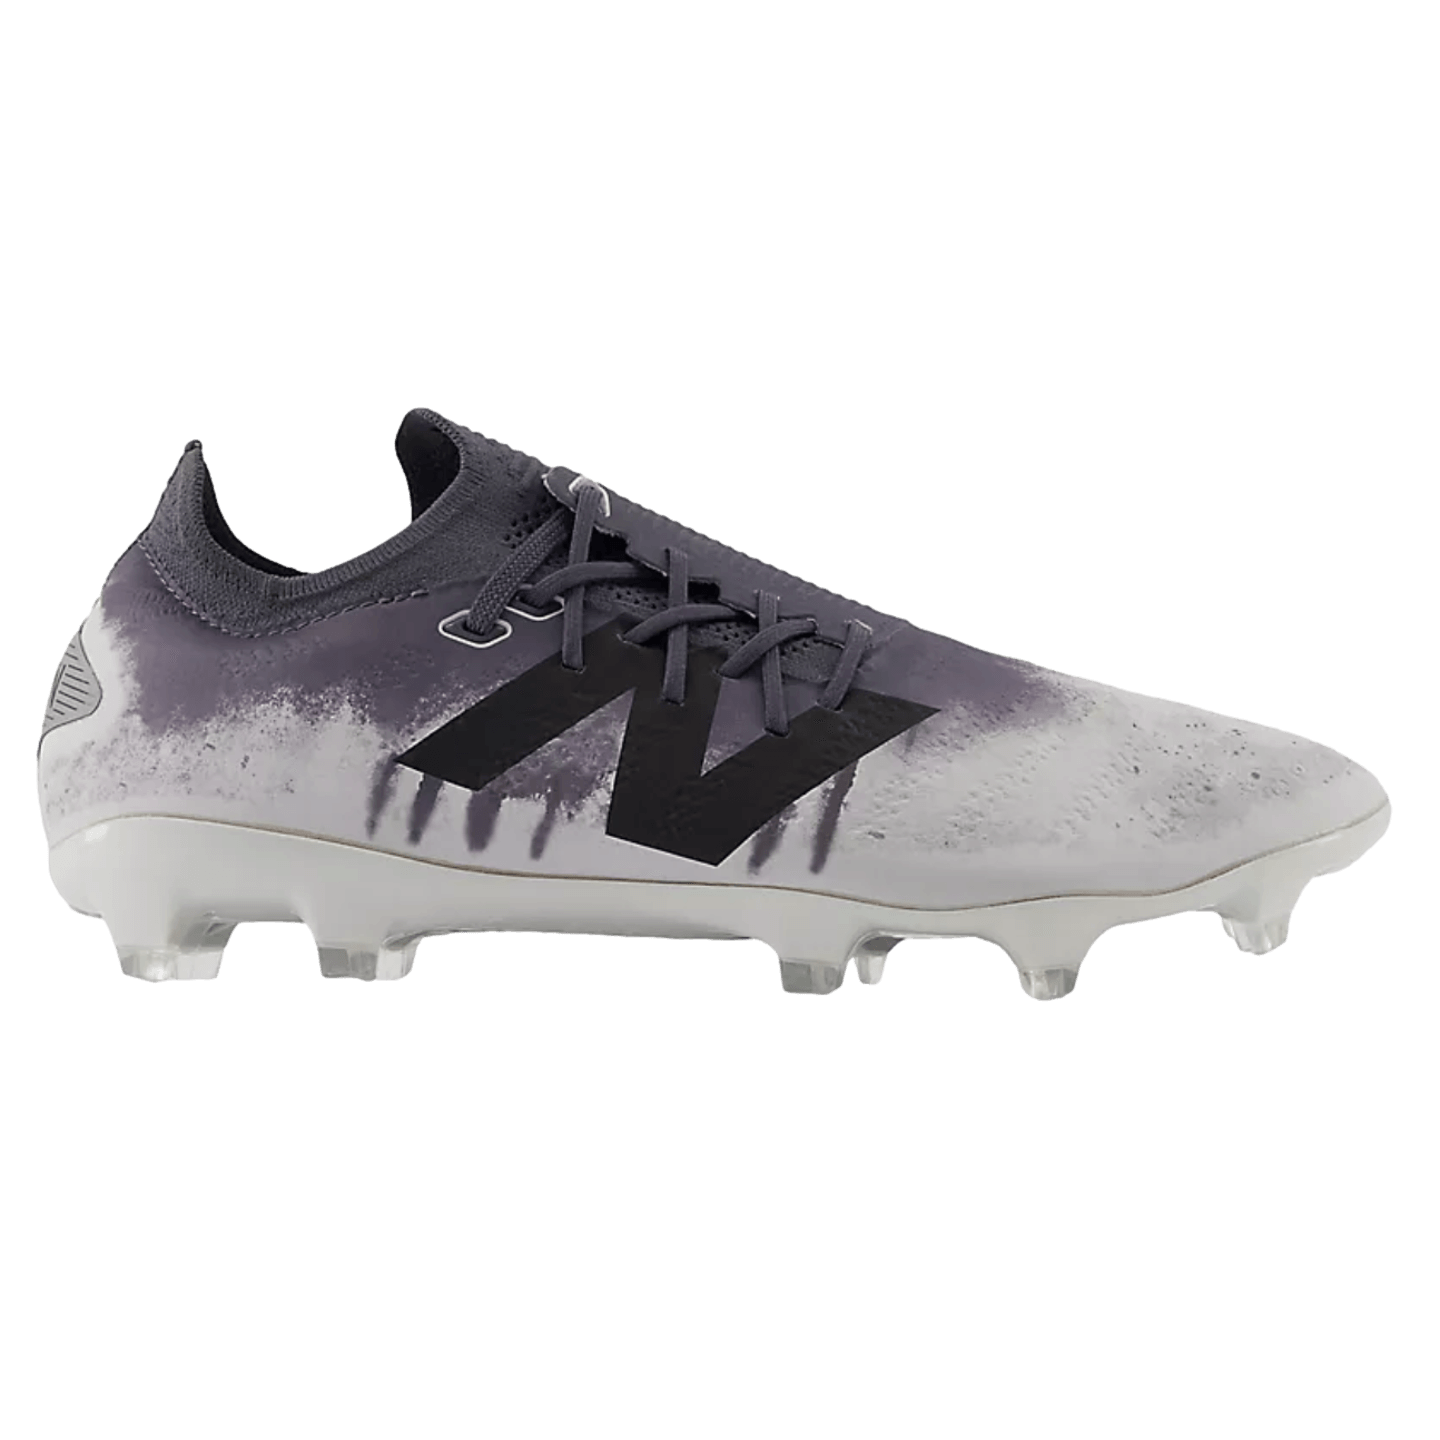 New Balance Furon 7+ Pro Firm Ground Cleats